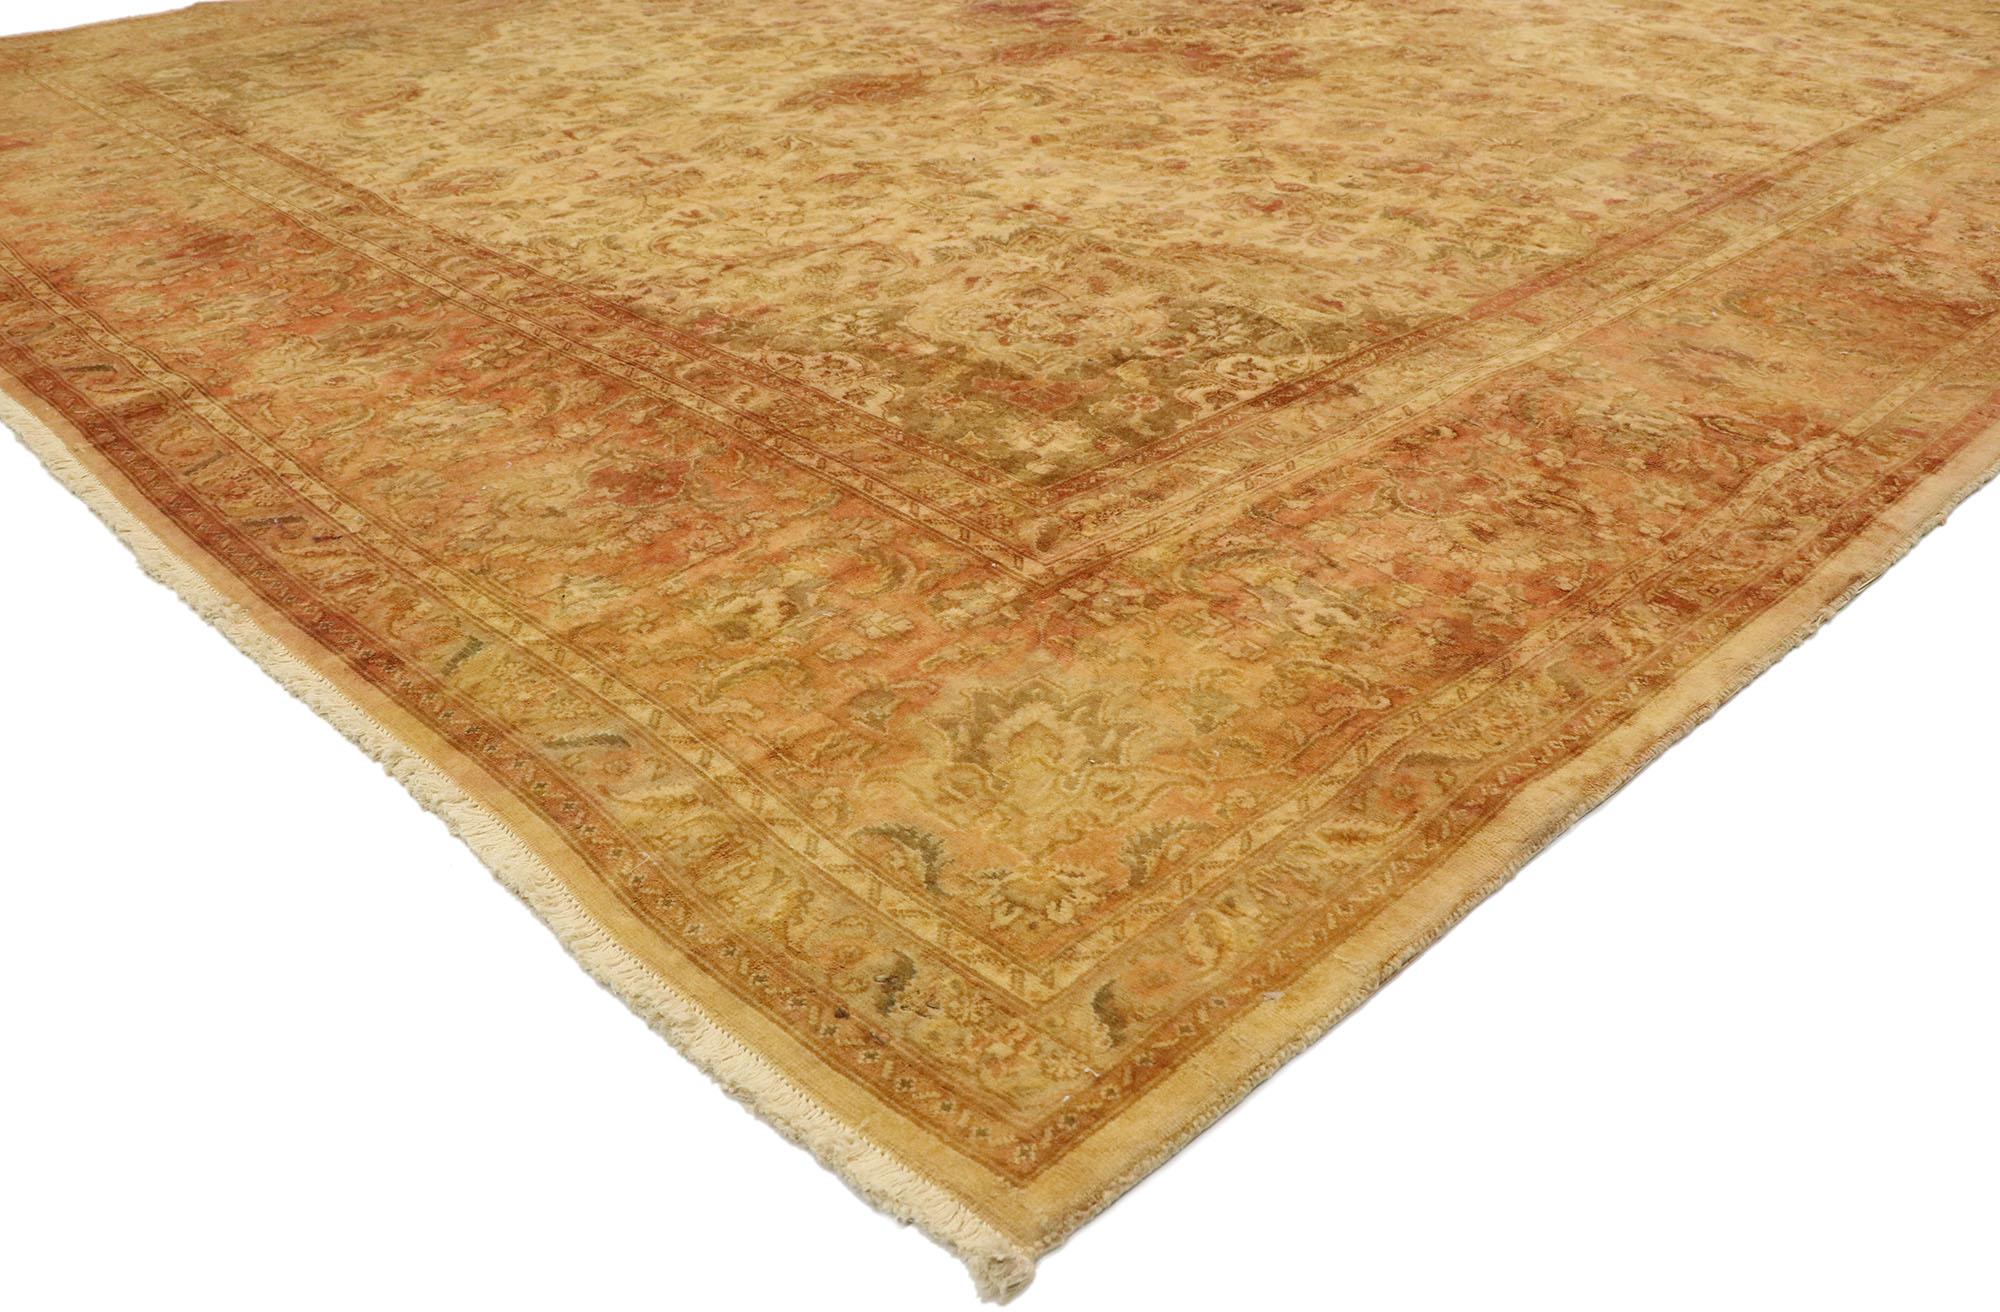 76376, vintage Persian Tabriz rug with Rustic Mediterranean Tuscan style. Emanating timeless elegance and warm, earthy colors, this hand knotted wool vintage Persian Tabriz rug beautifully embodies a modern Mediterranean style with Italian Tuscan